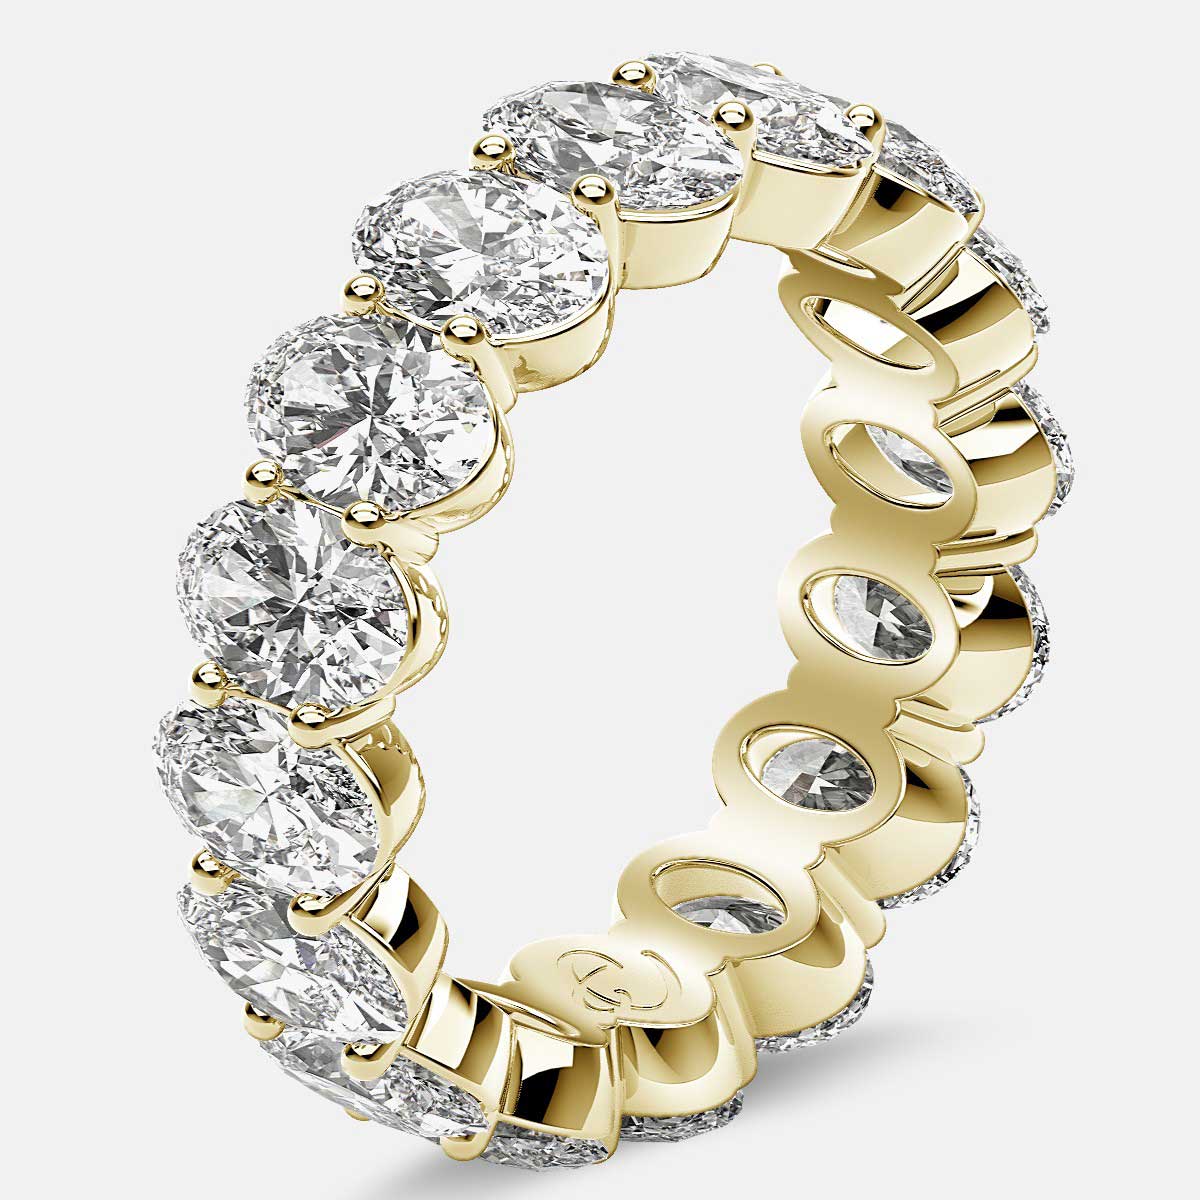 Prong Set Eternity Ring with Oval Diamonds in 18k Yellow Gold